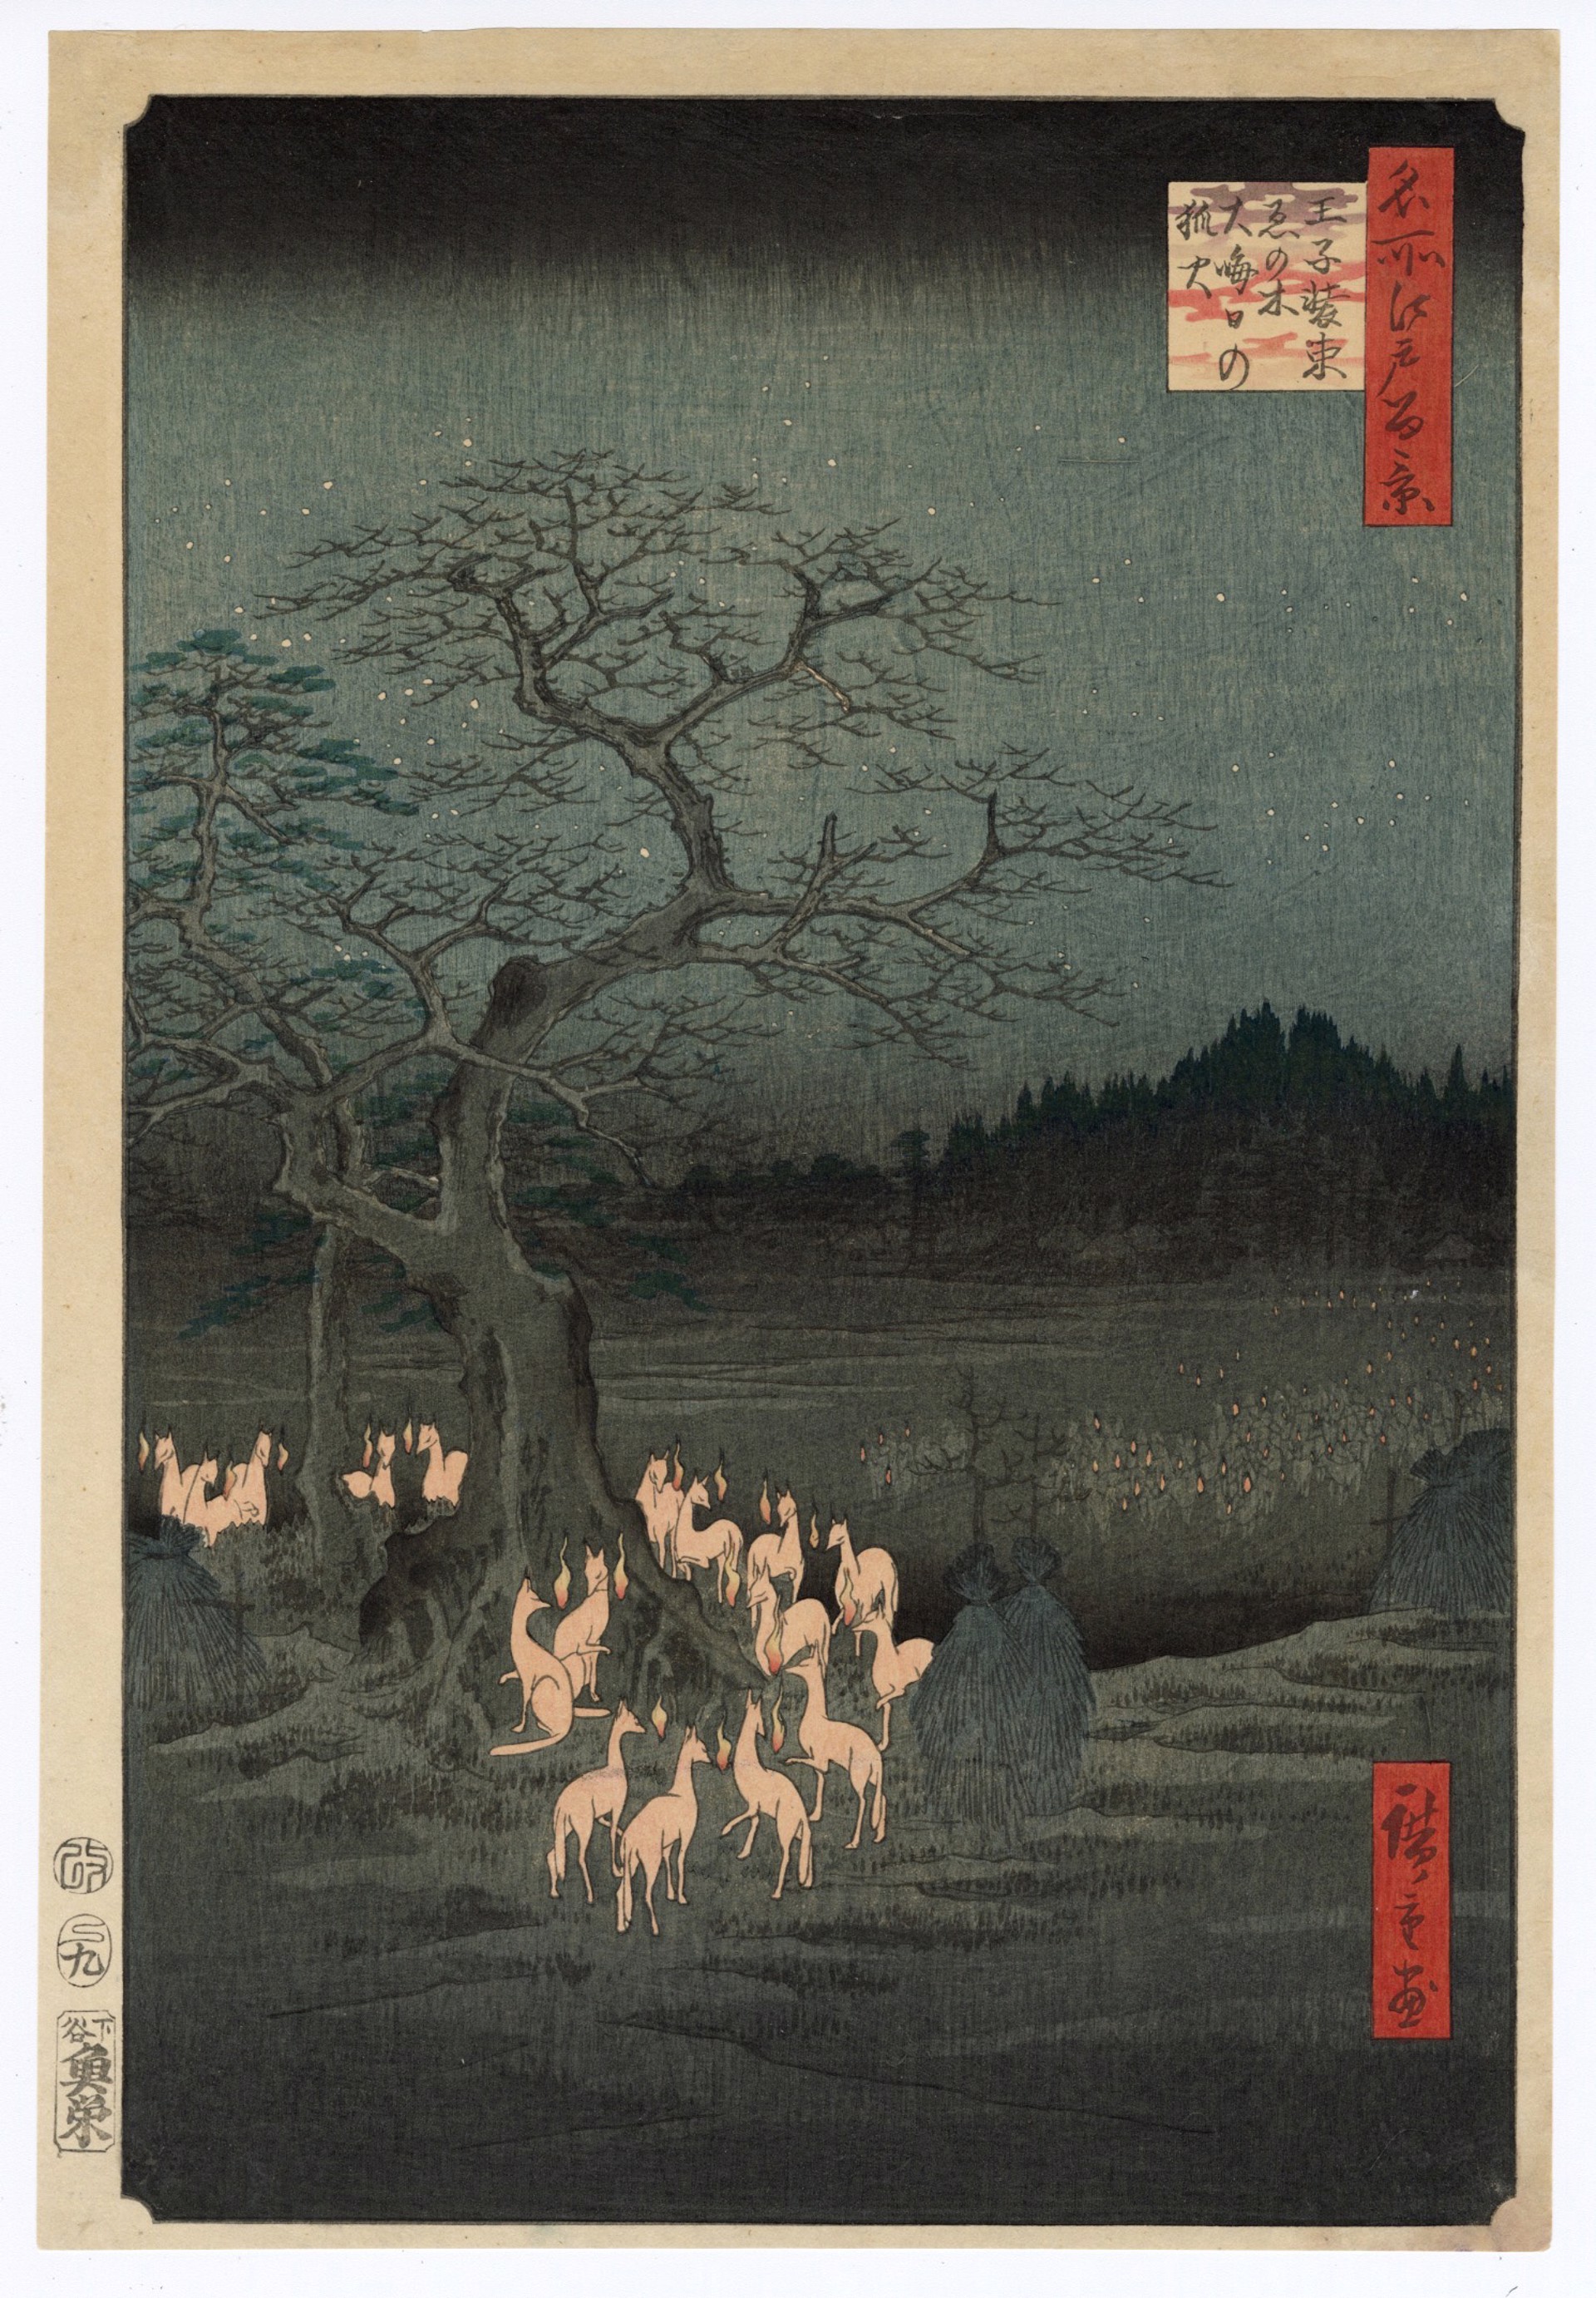 New Years Eve Fox Fires at the Nettle Tree by Hiroshige